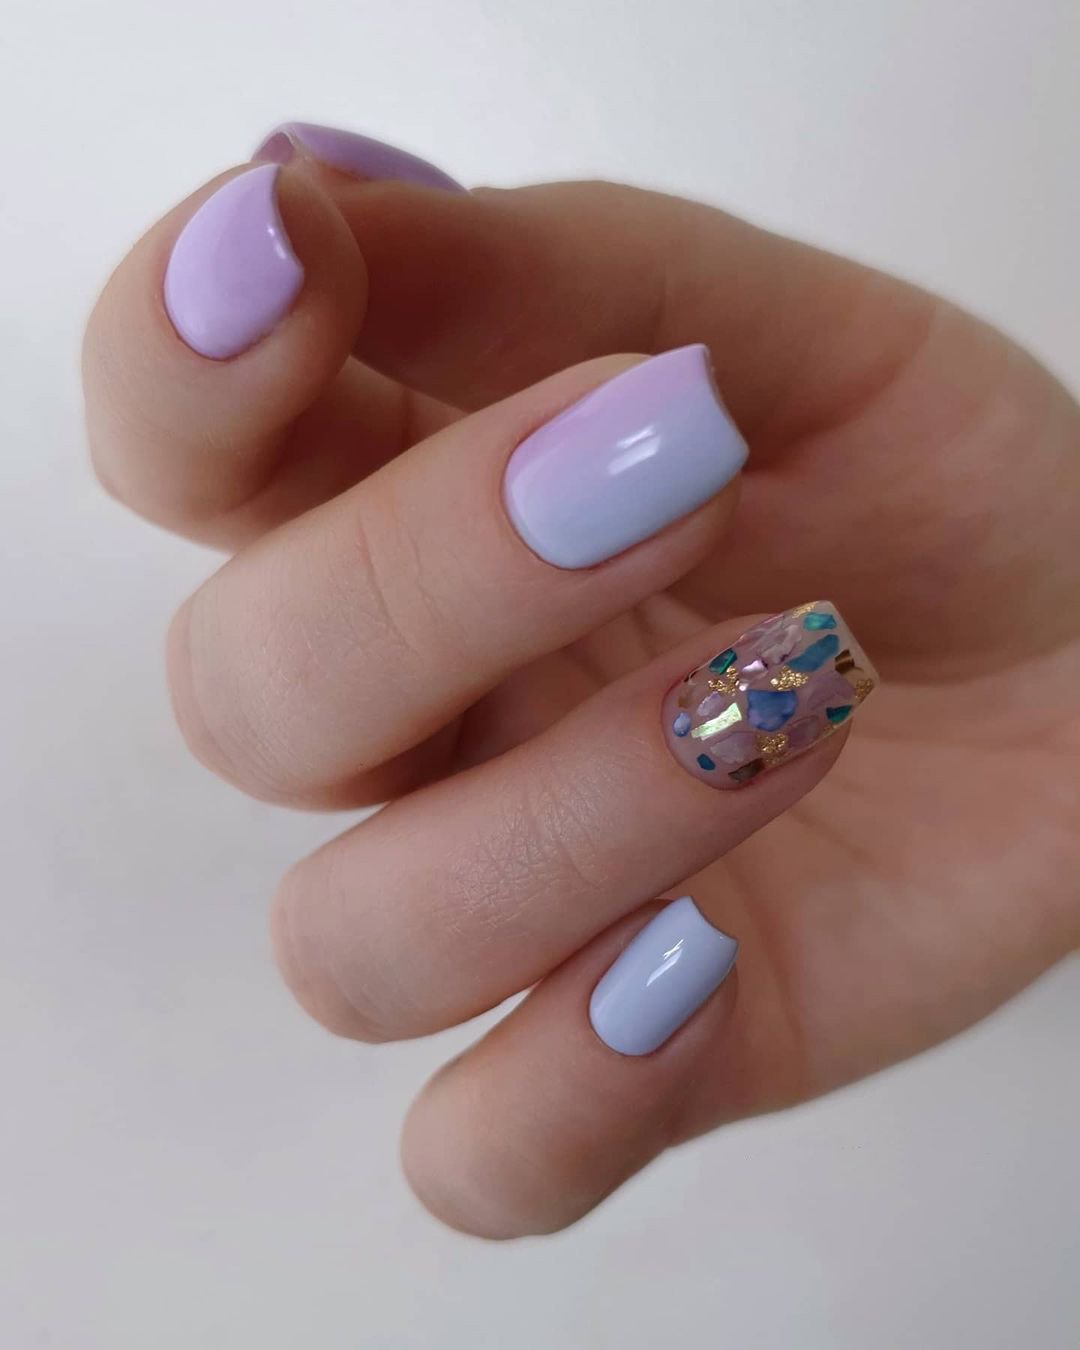 nail ideas for wedding in blue lilac ombre tones kangannynails